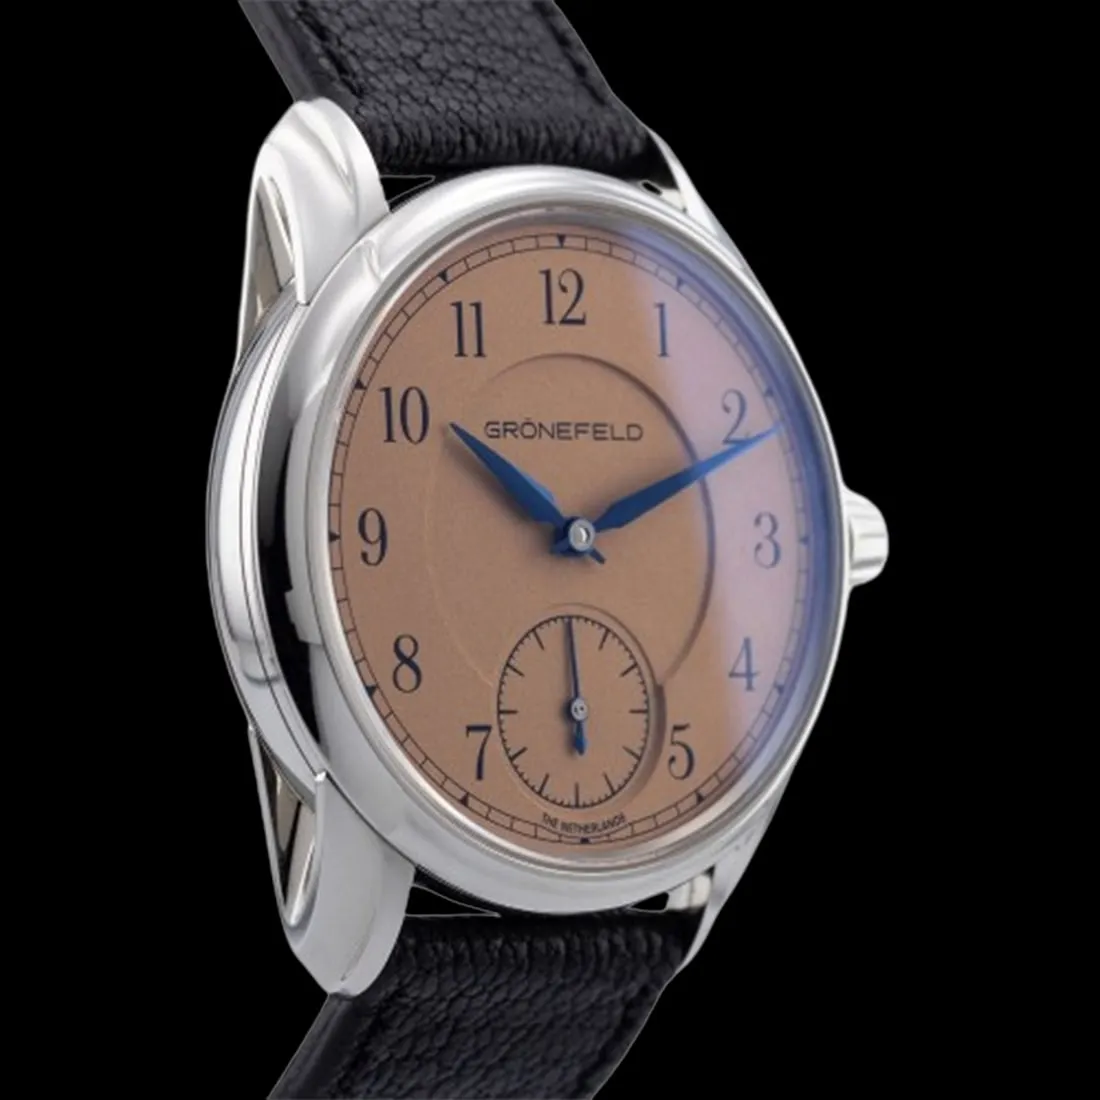 Gronefeld 1941 Remontoire Limited Edition For Hodinkee